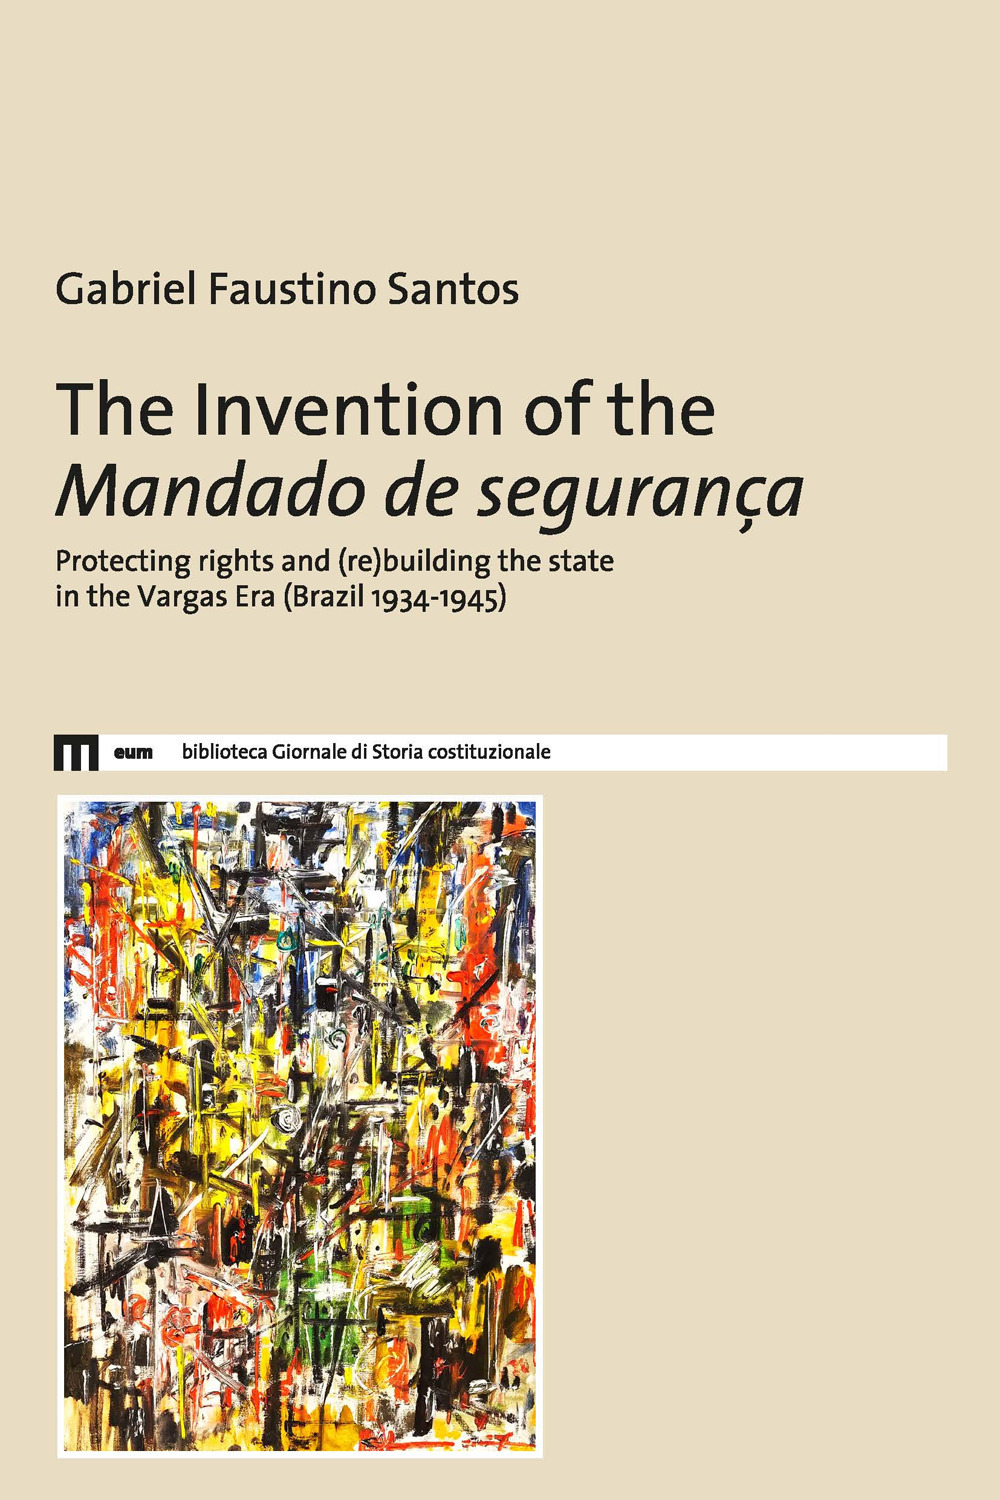 The invention of the Mandado de segurança. Protecting rights and (re)building the state in the Vargas Era (Brazil 1934-1945)